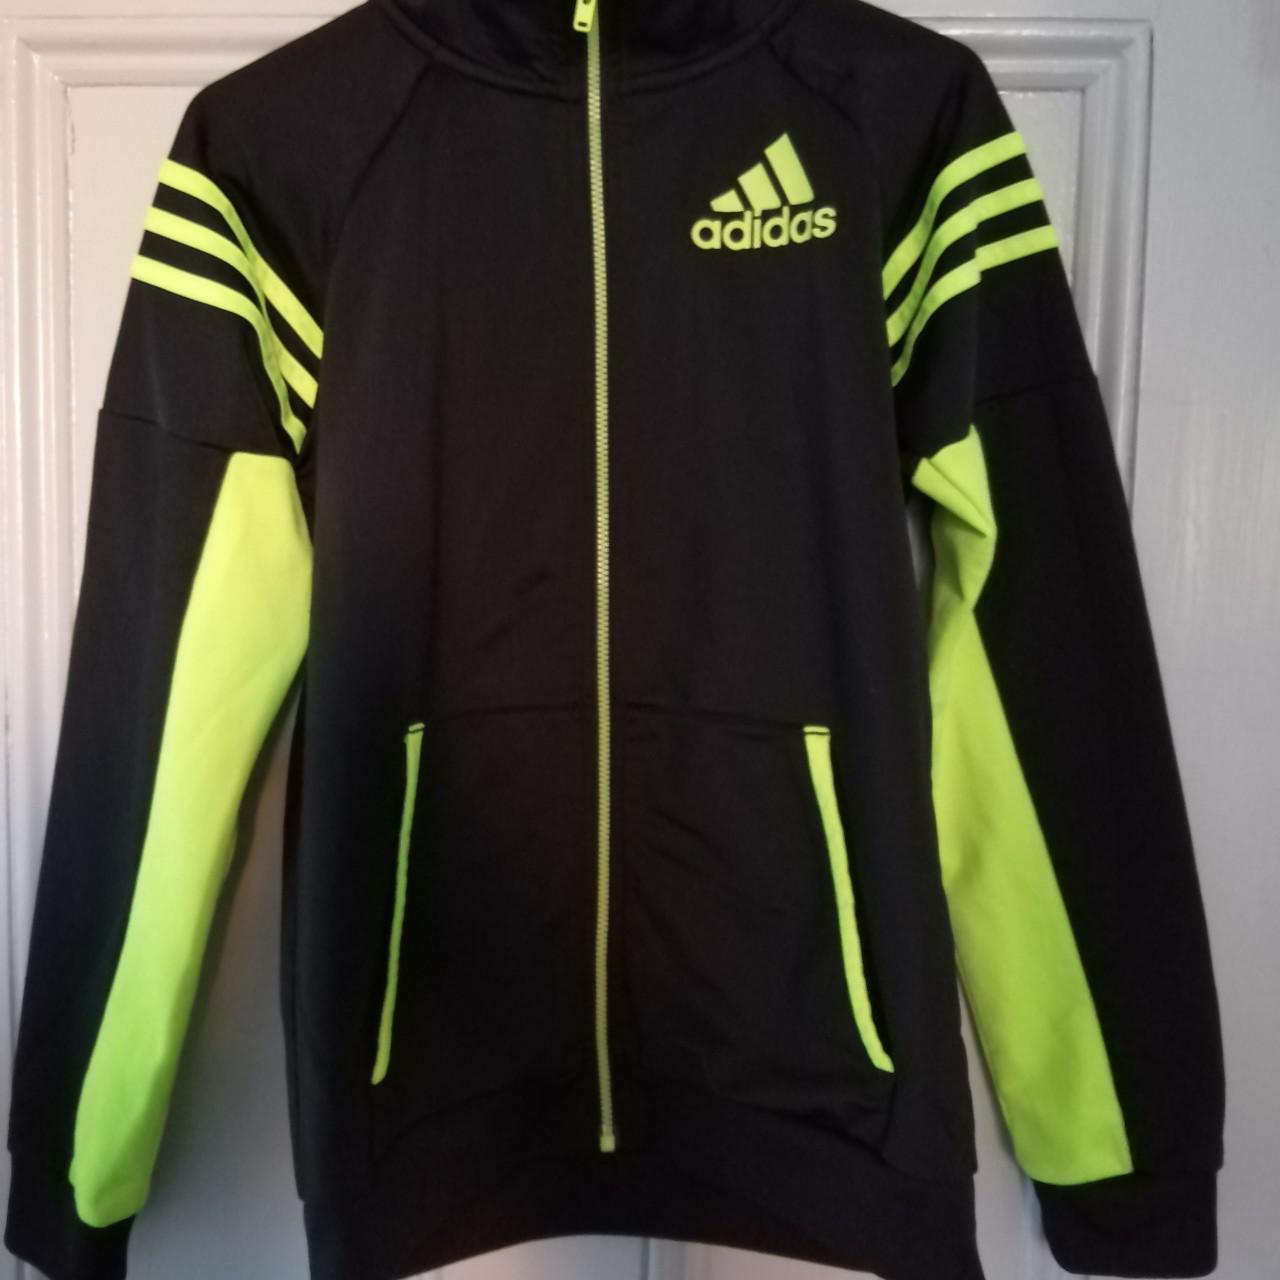 Adidas black and green track top Size child's... - Depop